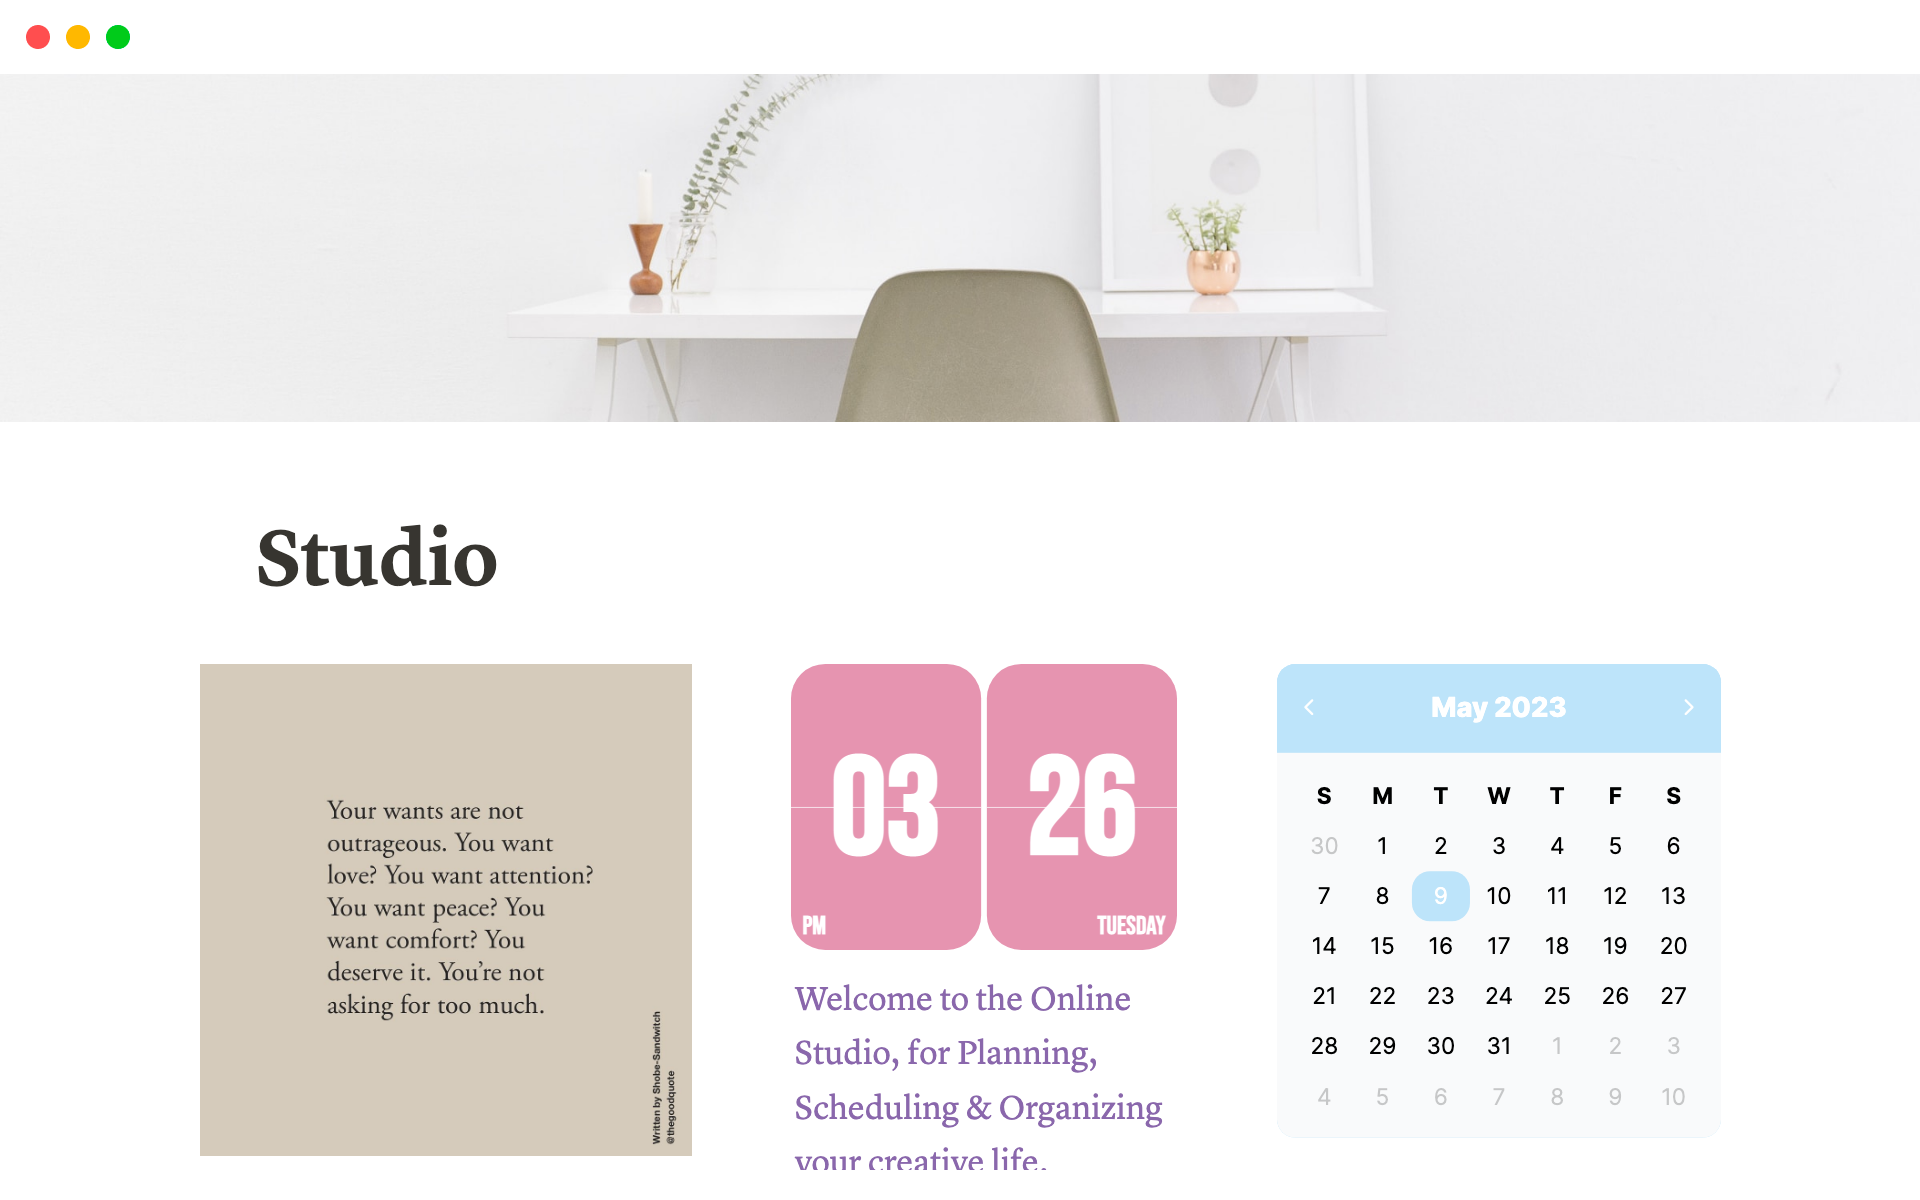 Online Studio- Content planner for Planning, Organizing and Scheduling your creative life.